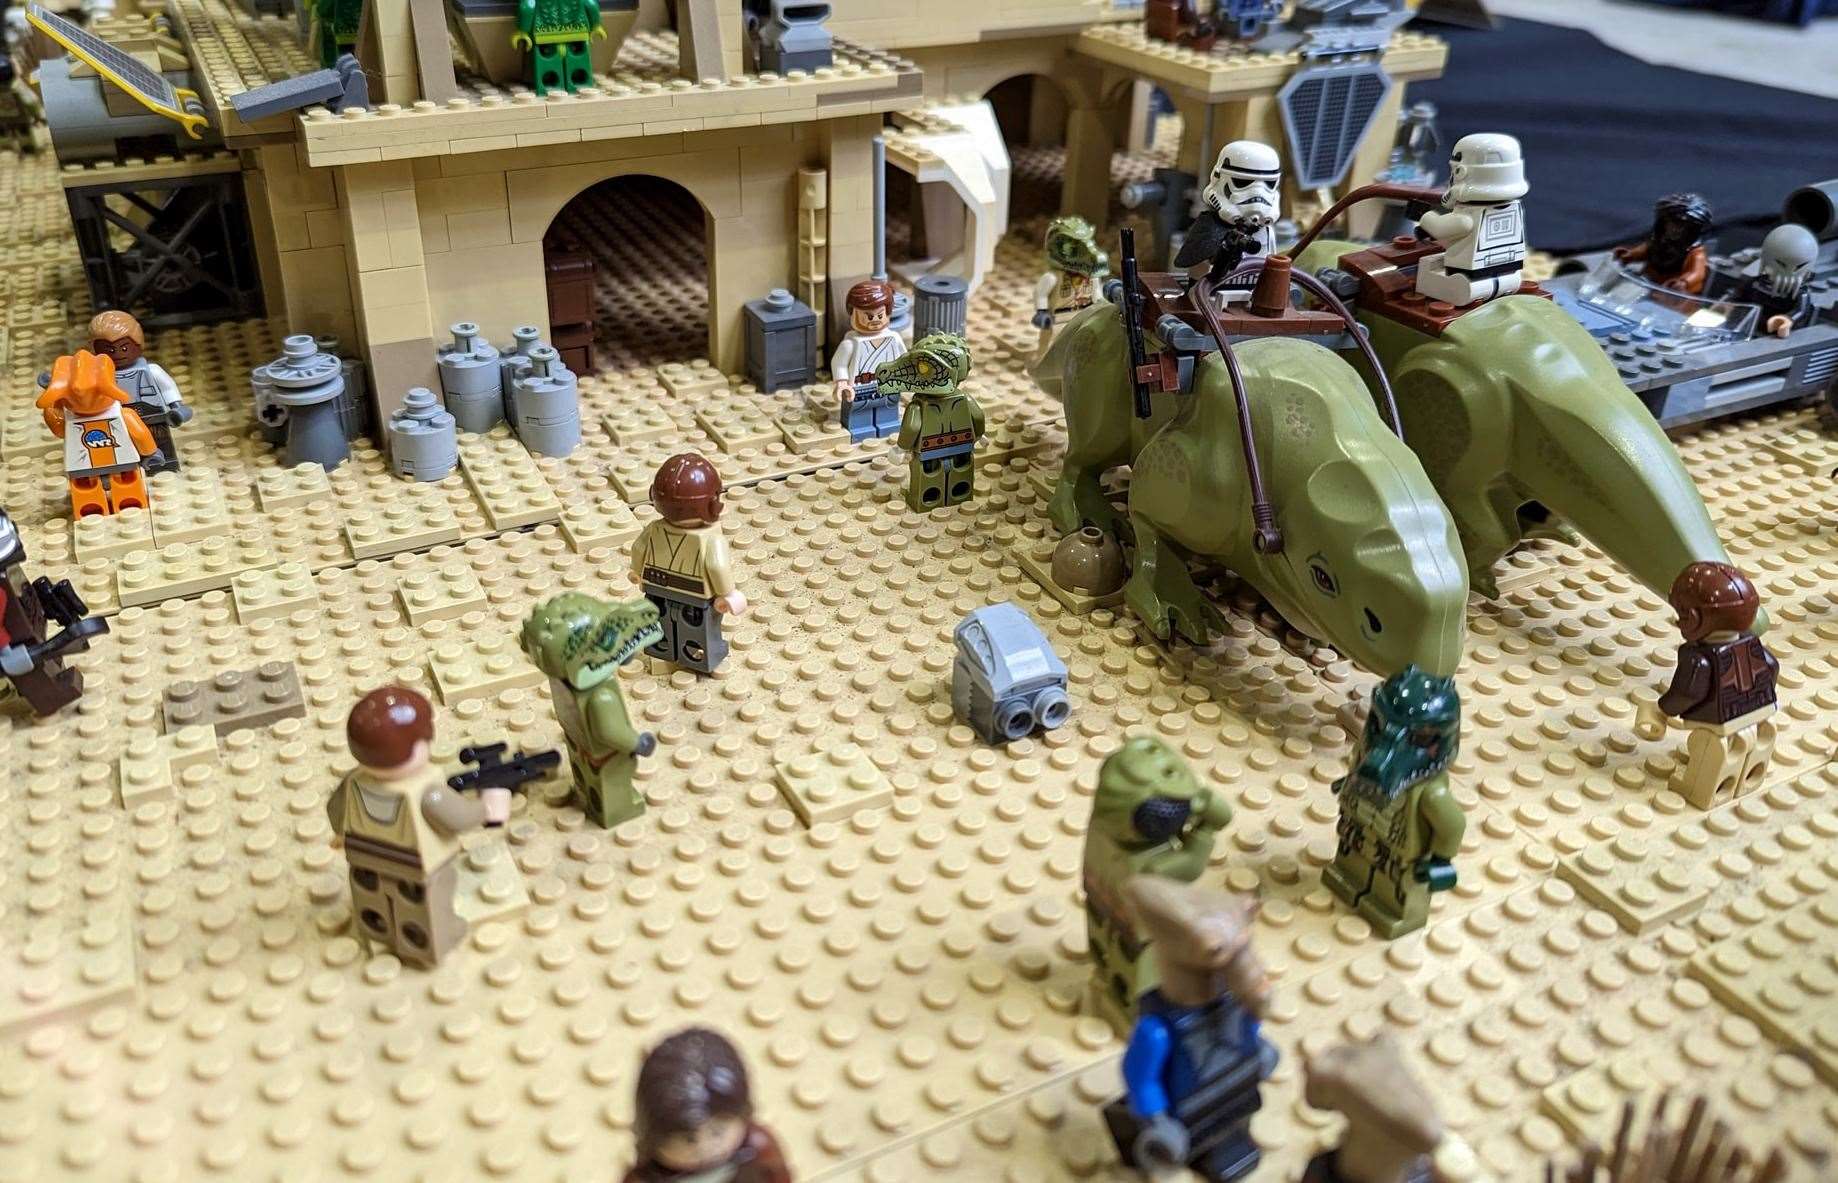 Previous displays have included this Star Wars-themed diorama. Picture: Facebook / Brick Festival